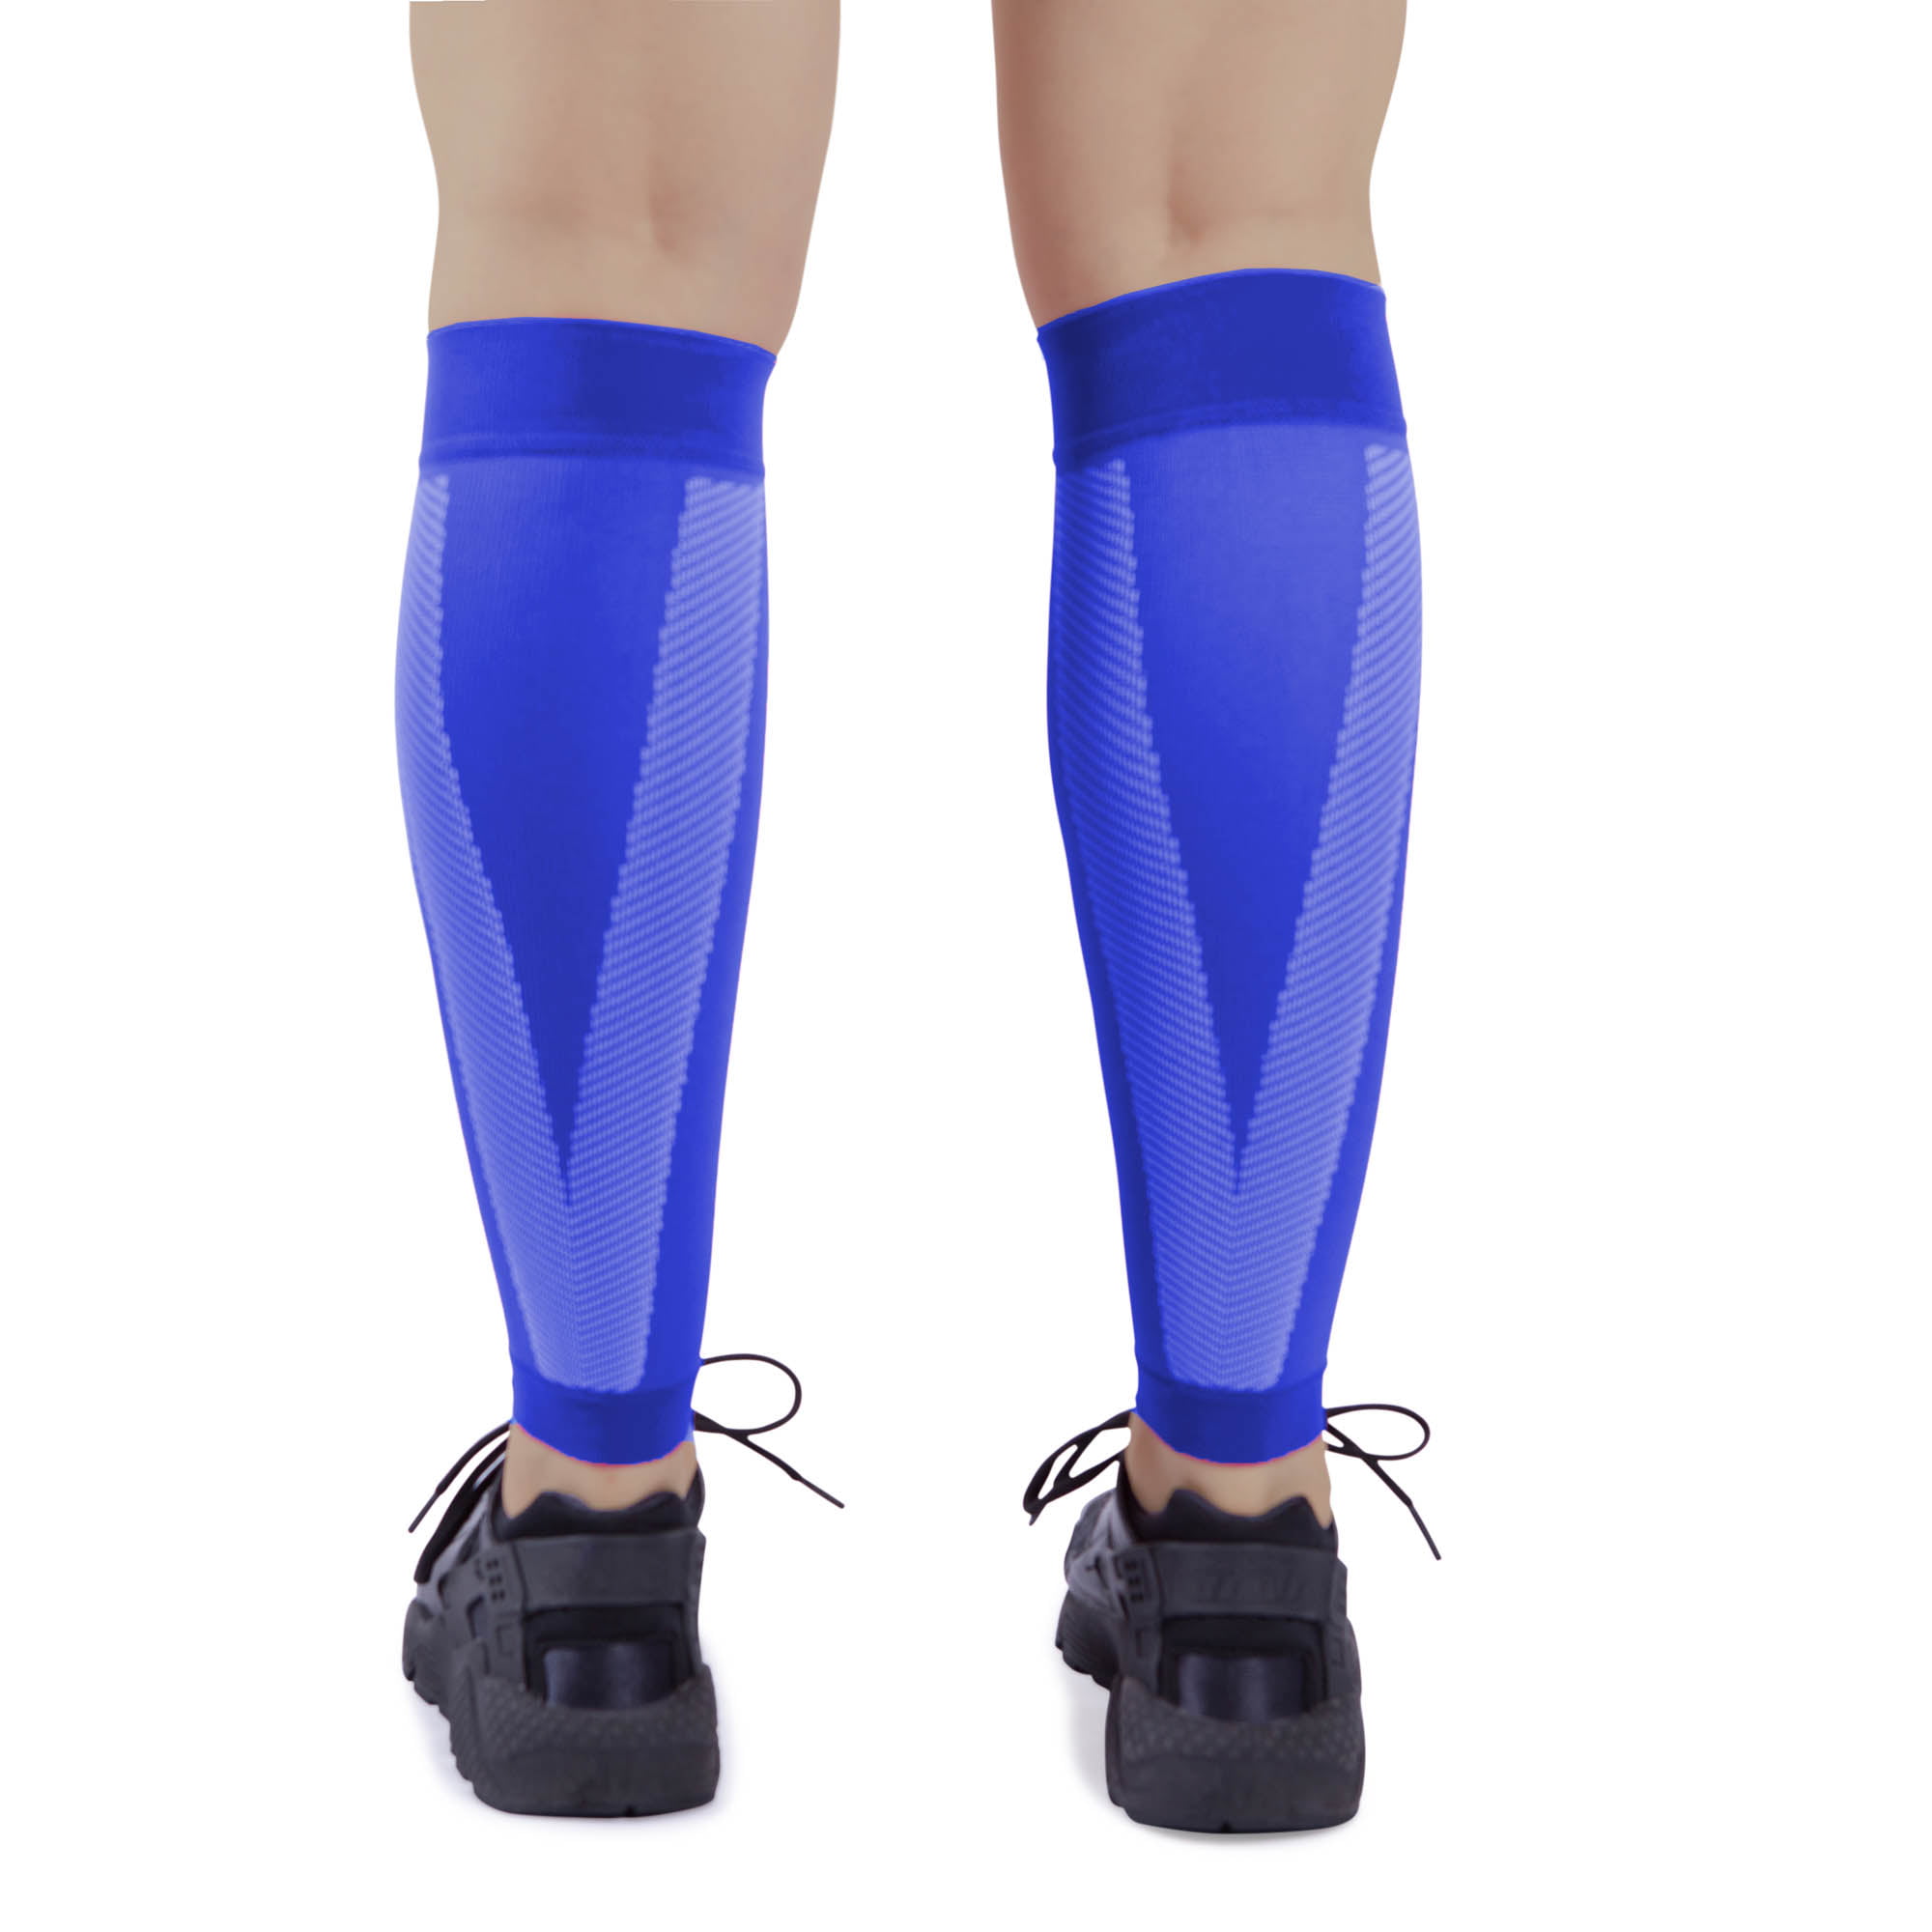 Calf Compression Sleeves，Footless Shin Splint Sleeve 20 to 30 mmHg Medical  Leg Calves Support Women Pain Relief Running Recovery Circulation Cramps